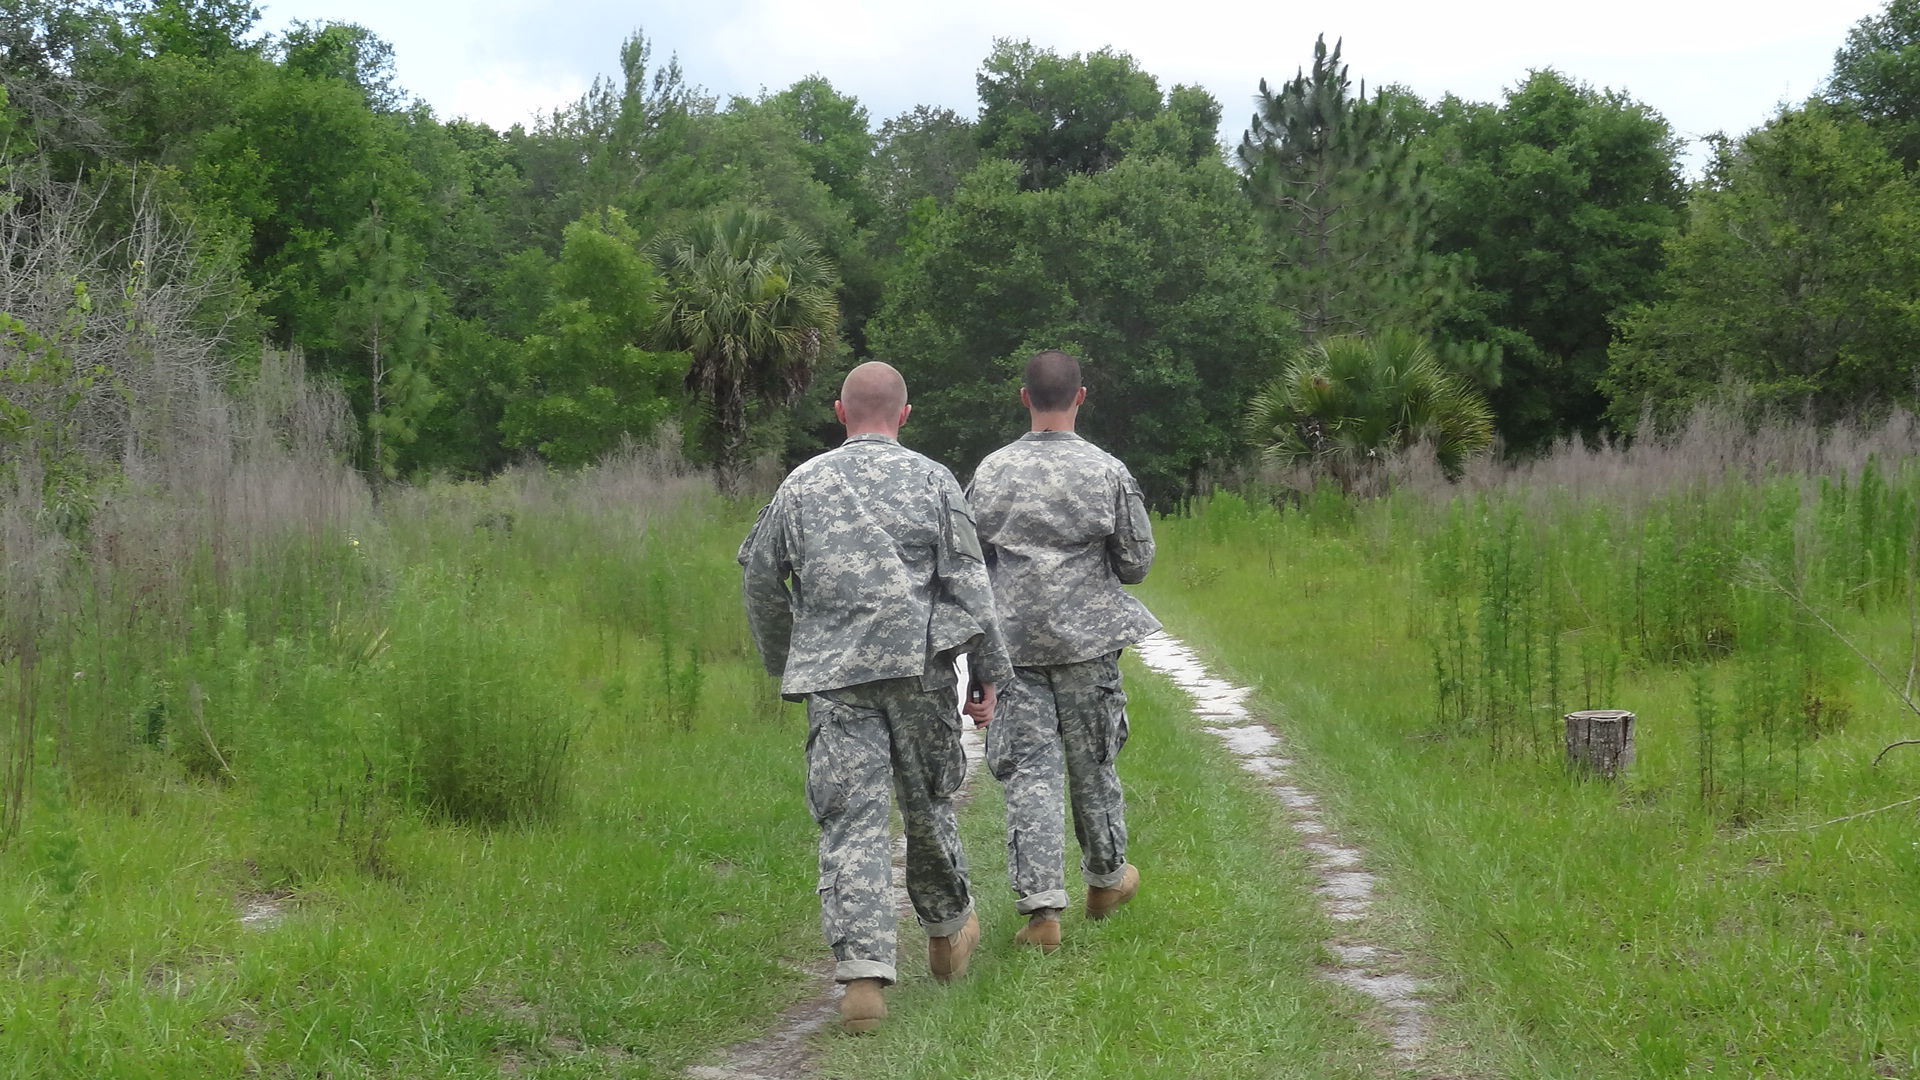 Cadets had to find their way through a wooded area during land navigation.